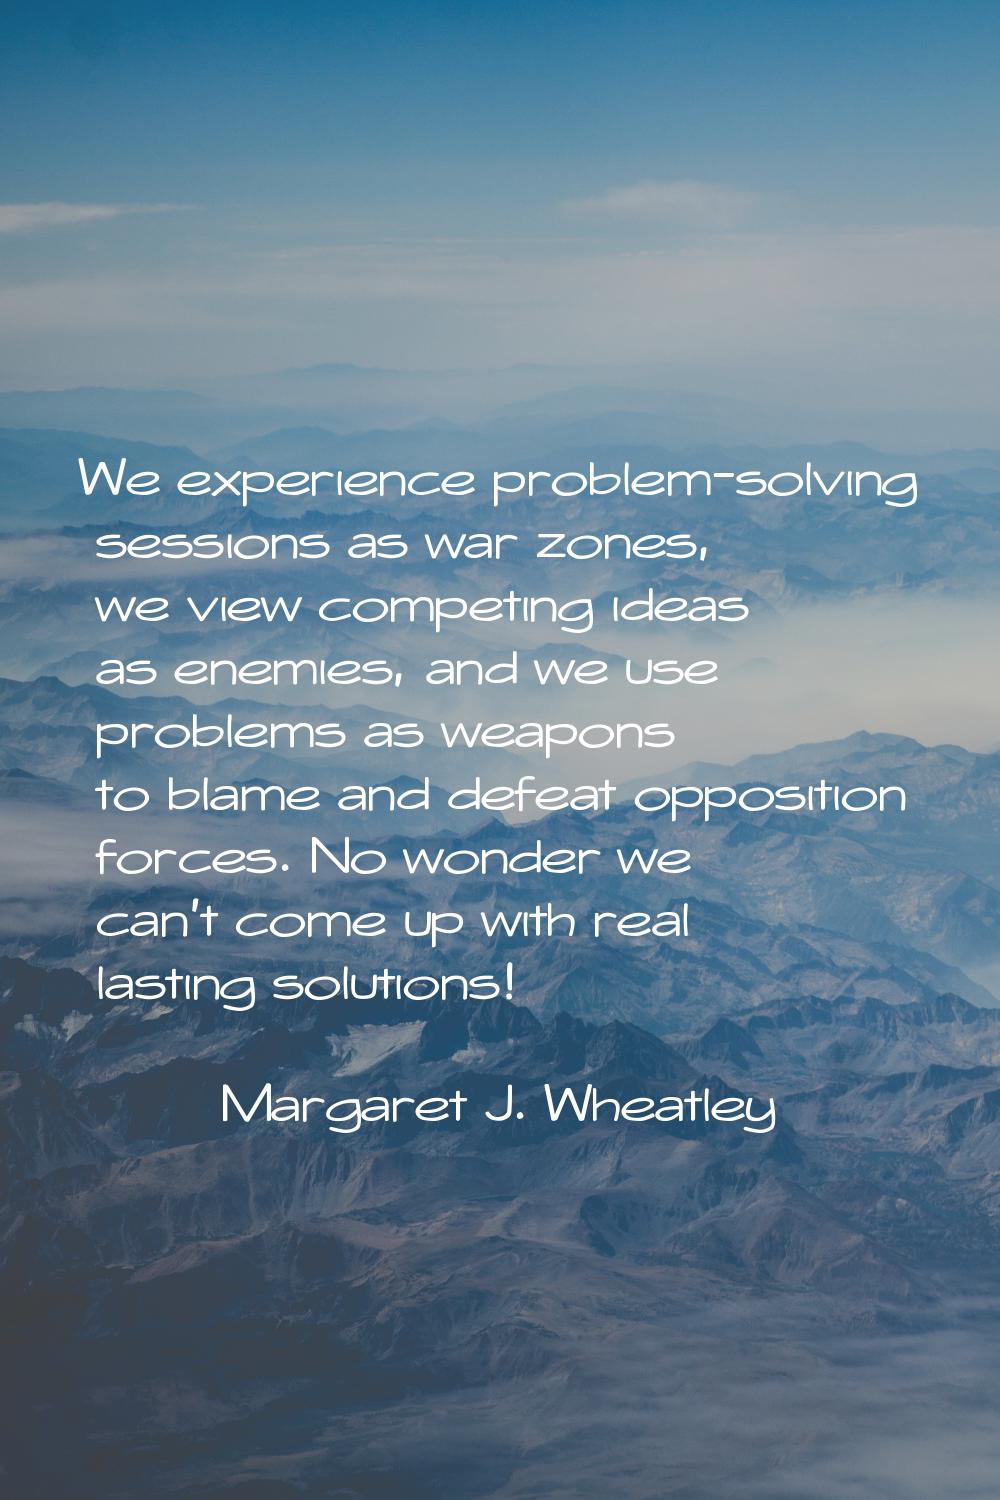 We experience problem-solving sessions as war zones, we view competing ideas as enemies, and we use